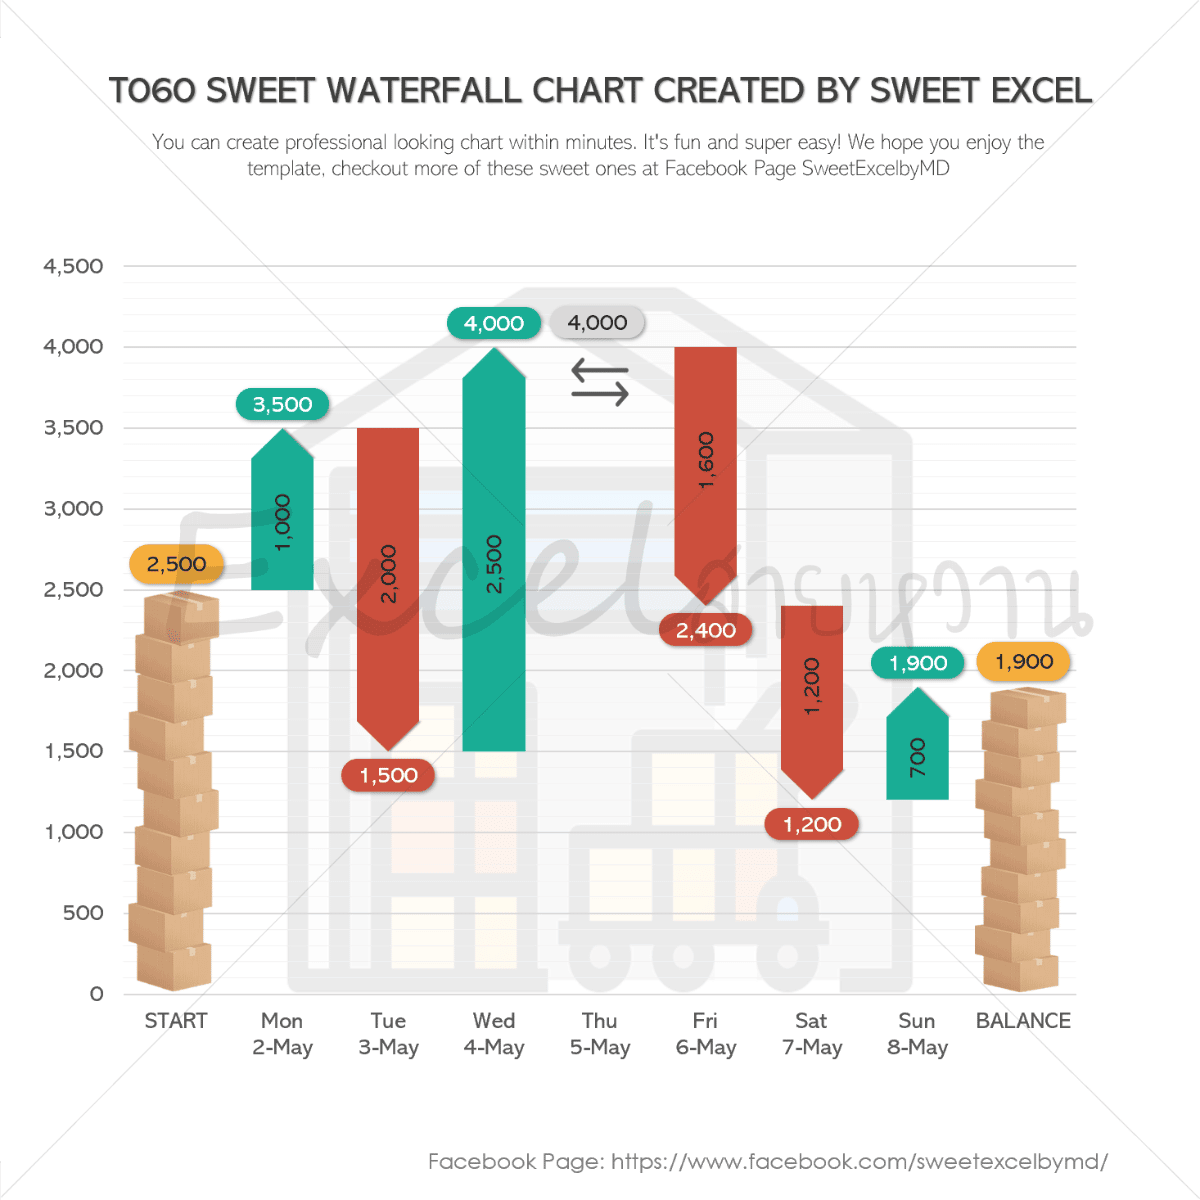 Waterfall Chart Excel